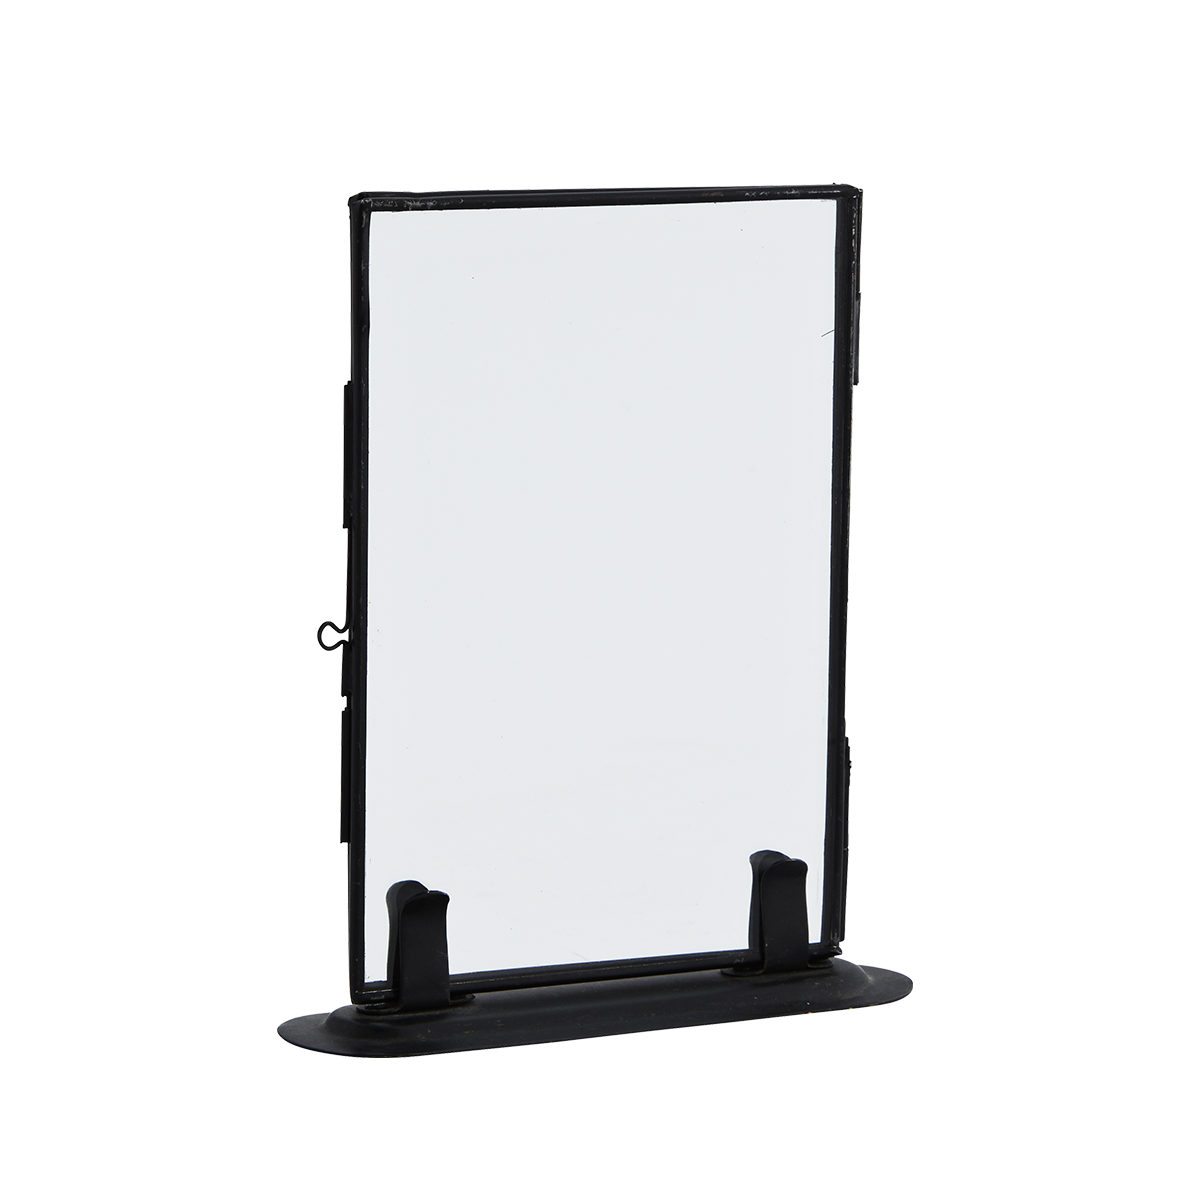 Photo frame on stand